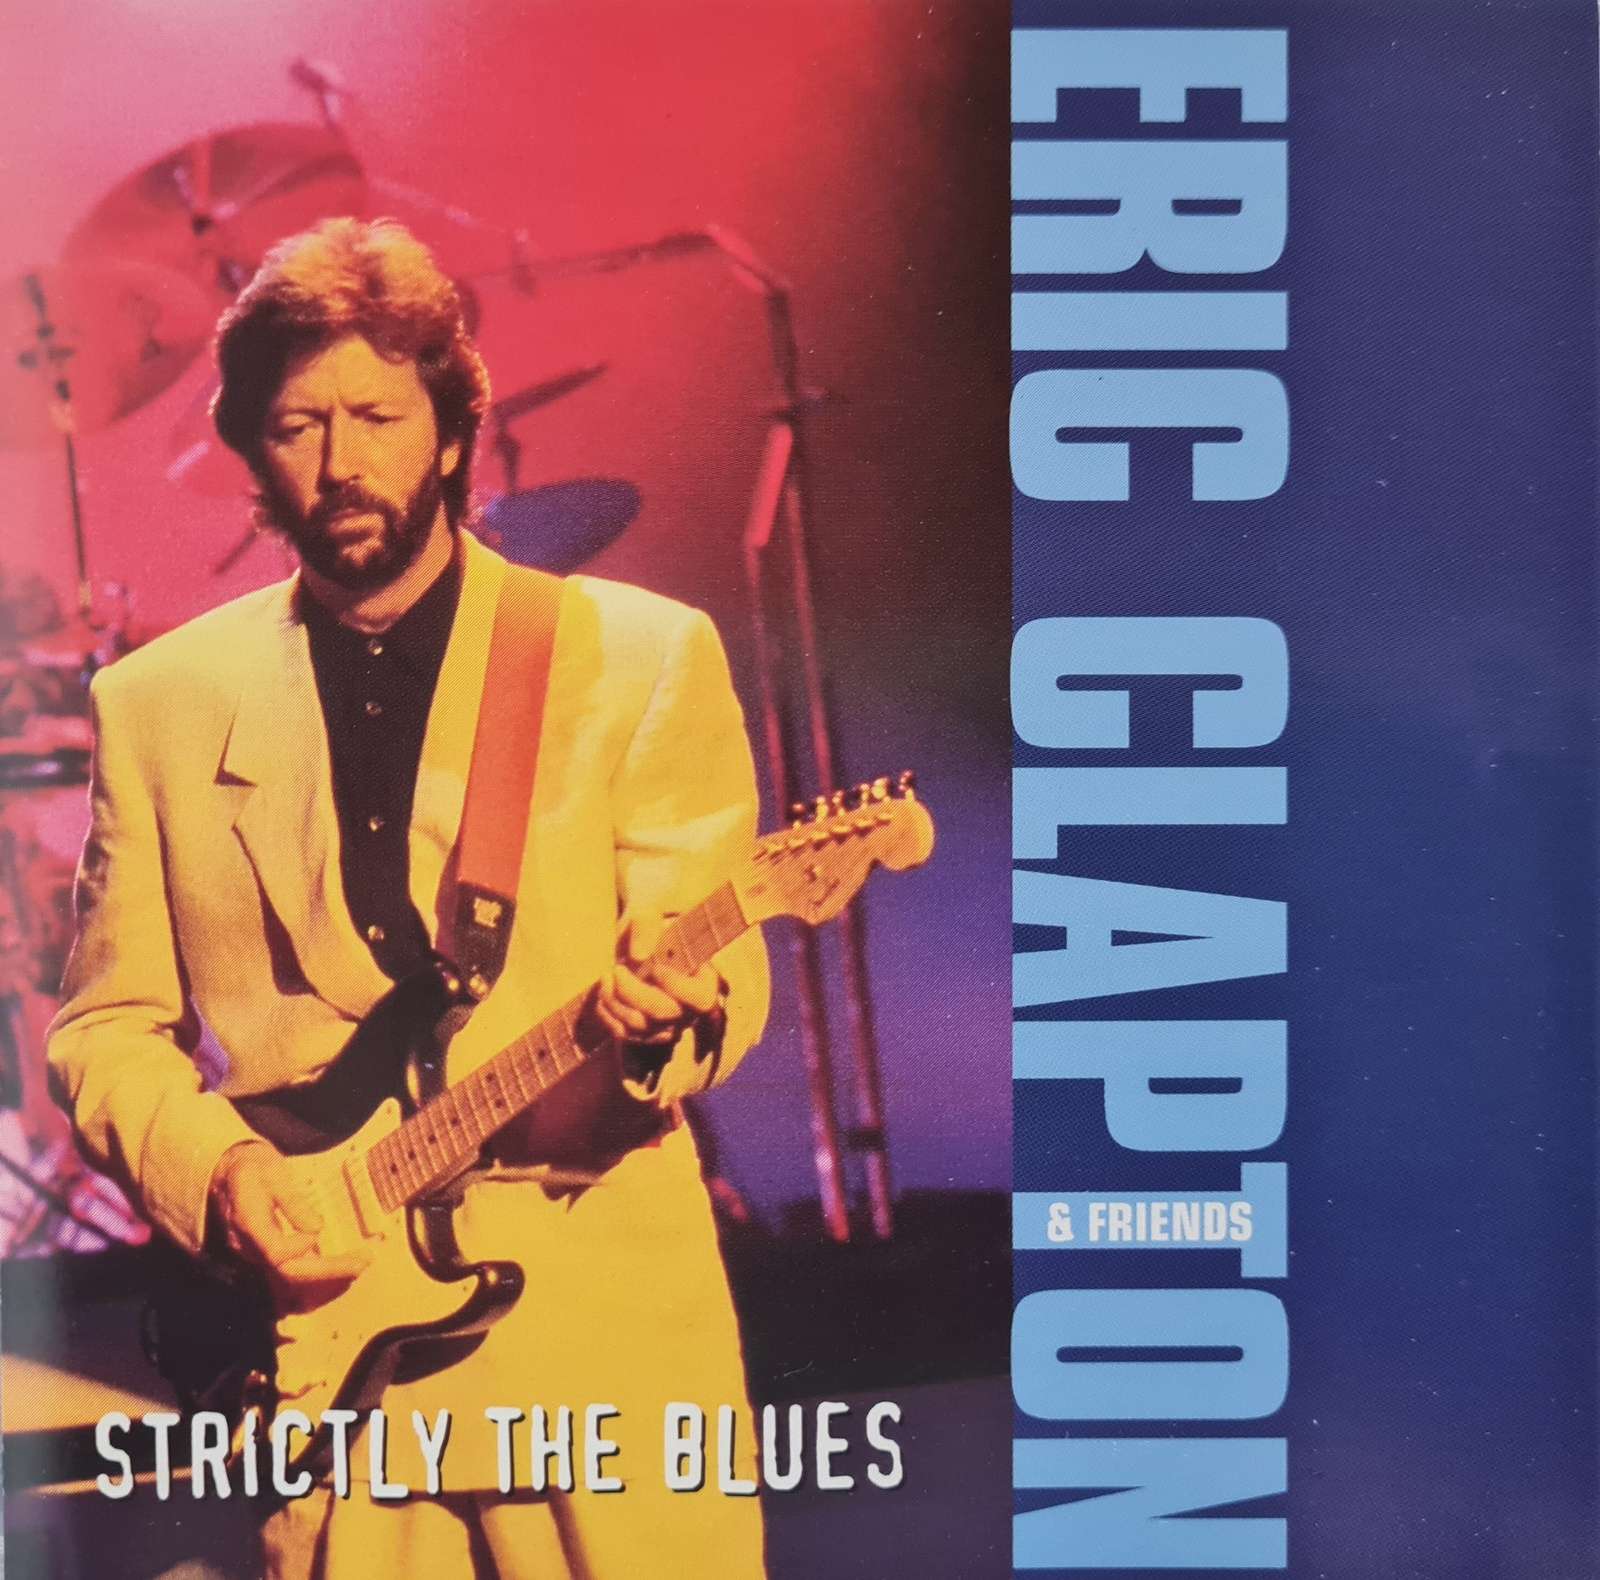 Eric Clapton & Friends - Strictly the Blues CD